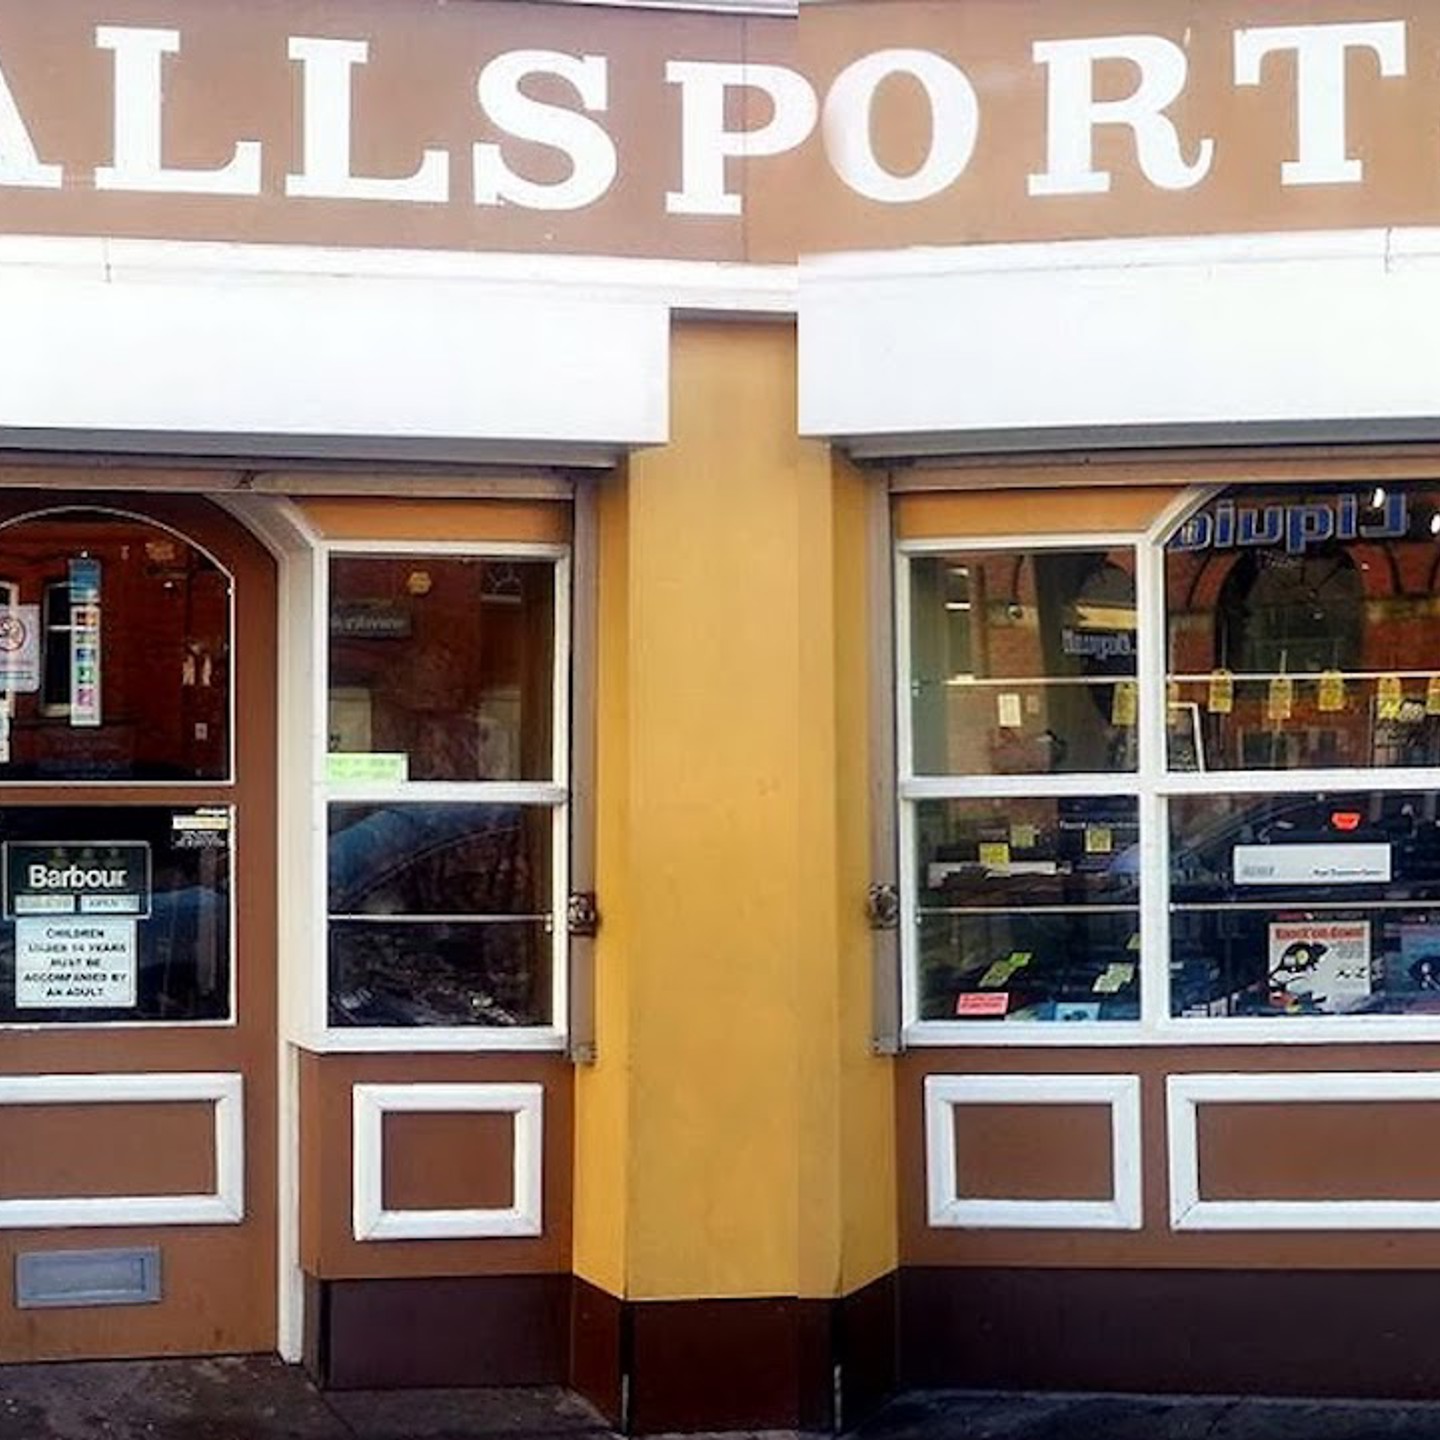 The Remaining Contents Of Allsports Gun Shop Gloucester Sold Ś35,000